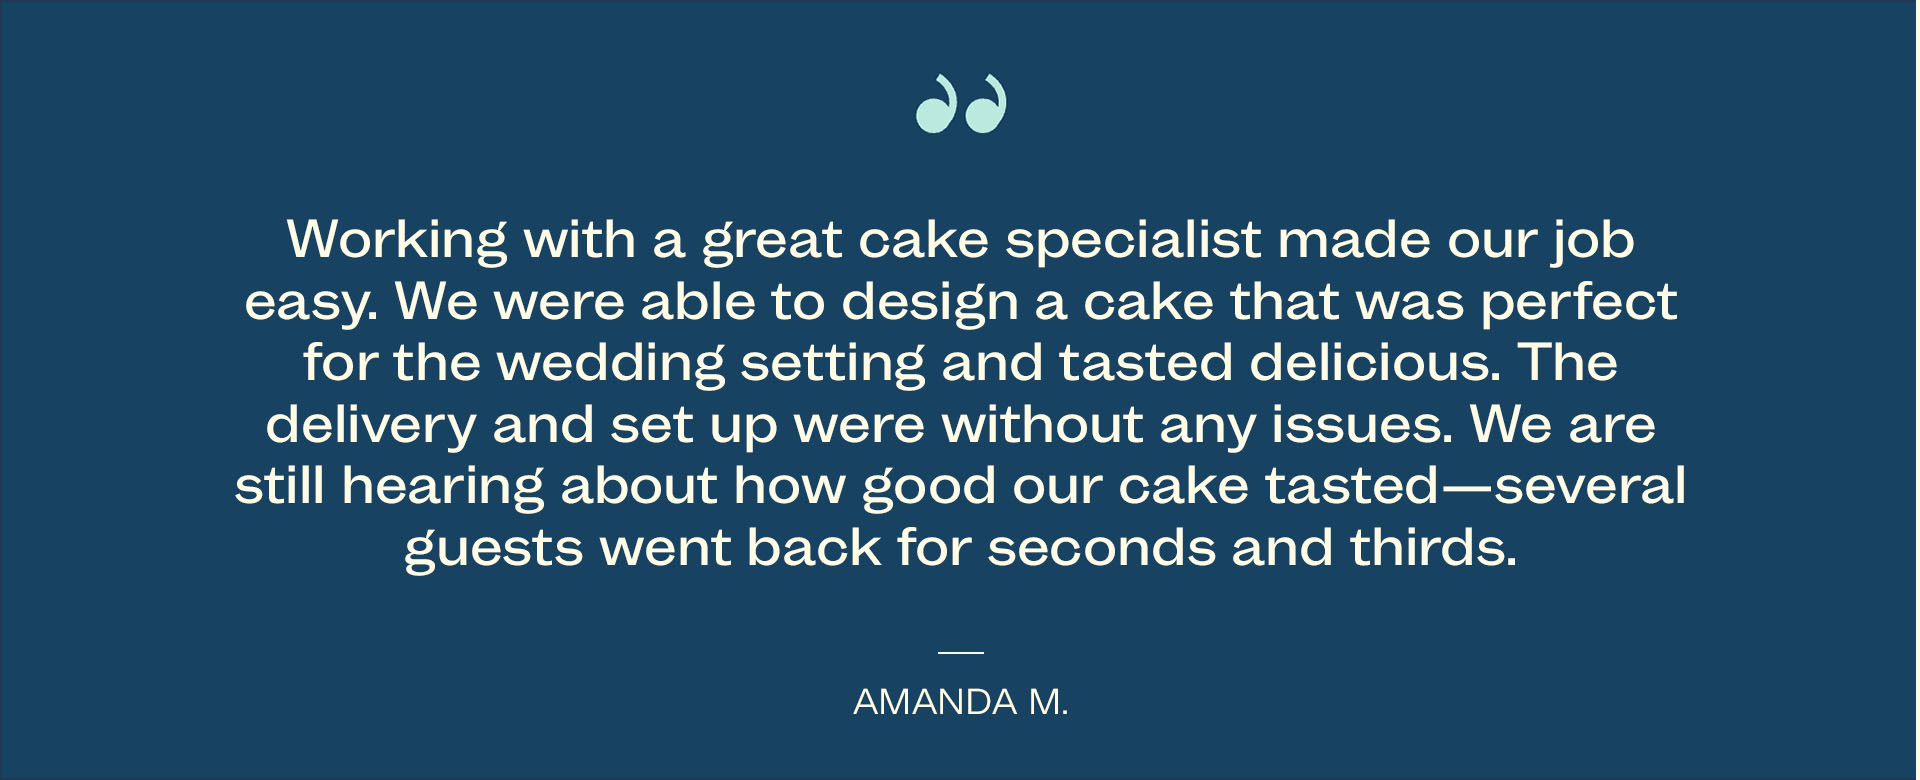 Working with a great cake specialist made our job easy. We were able to design a cake that was perfect for the wedding setting and tasted delicious. The delivery. and set up were without any. issues. We are still hearing about how good our cake tasted - several guests went back for seconds and thirds. - Amanda M.